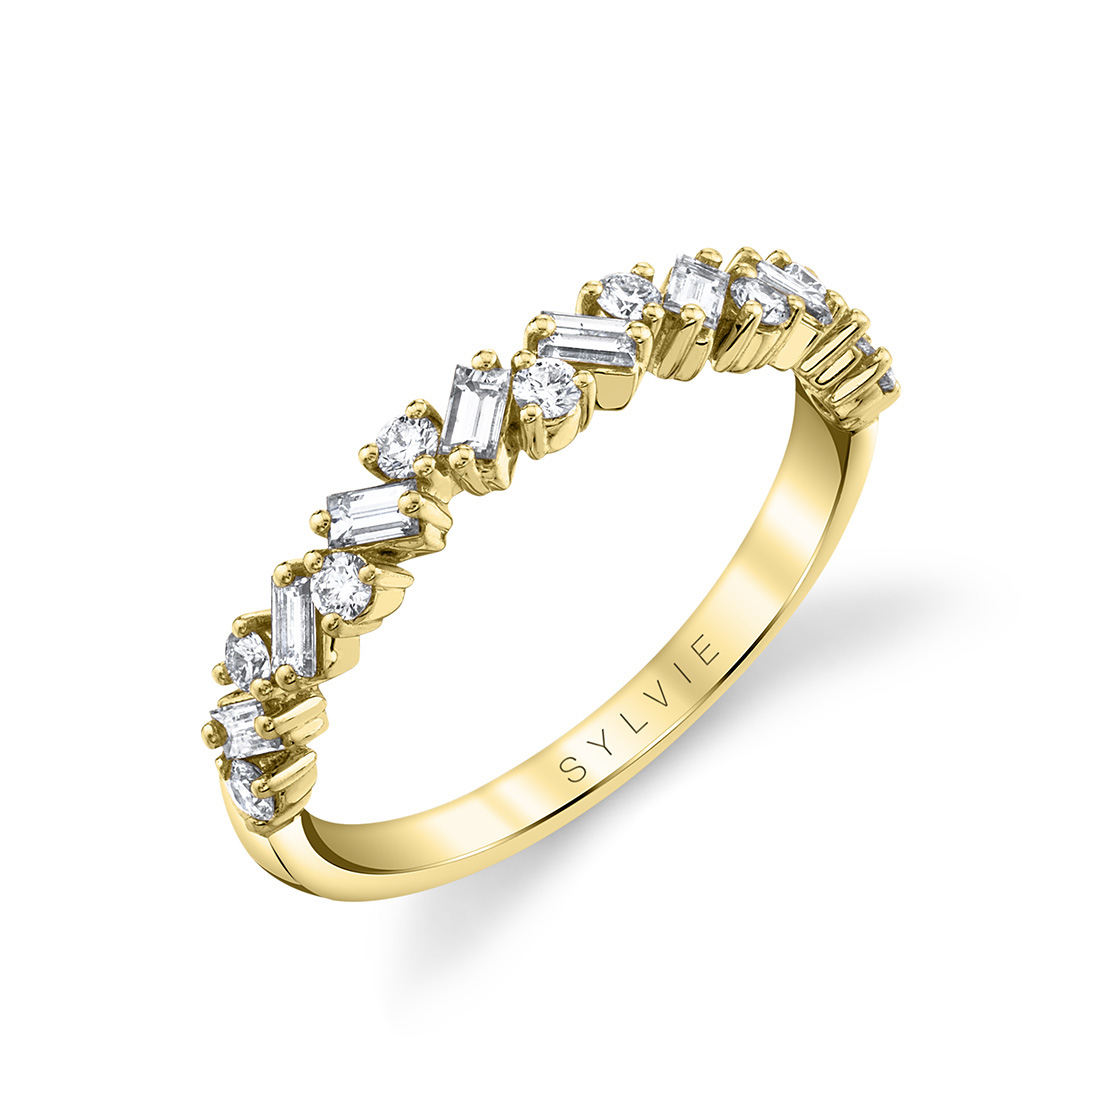 emerald and round diamond baguette wedding band in yellow gold